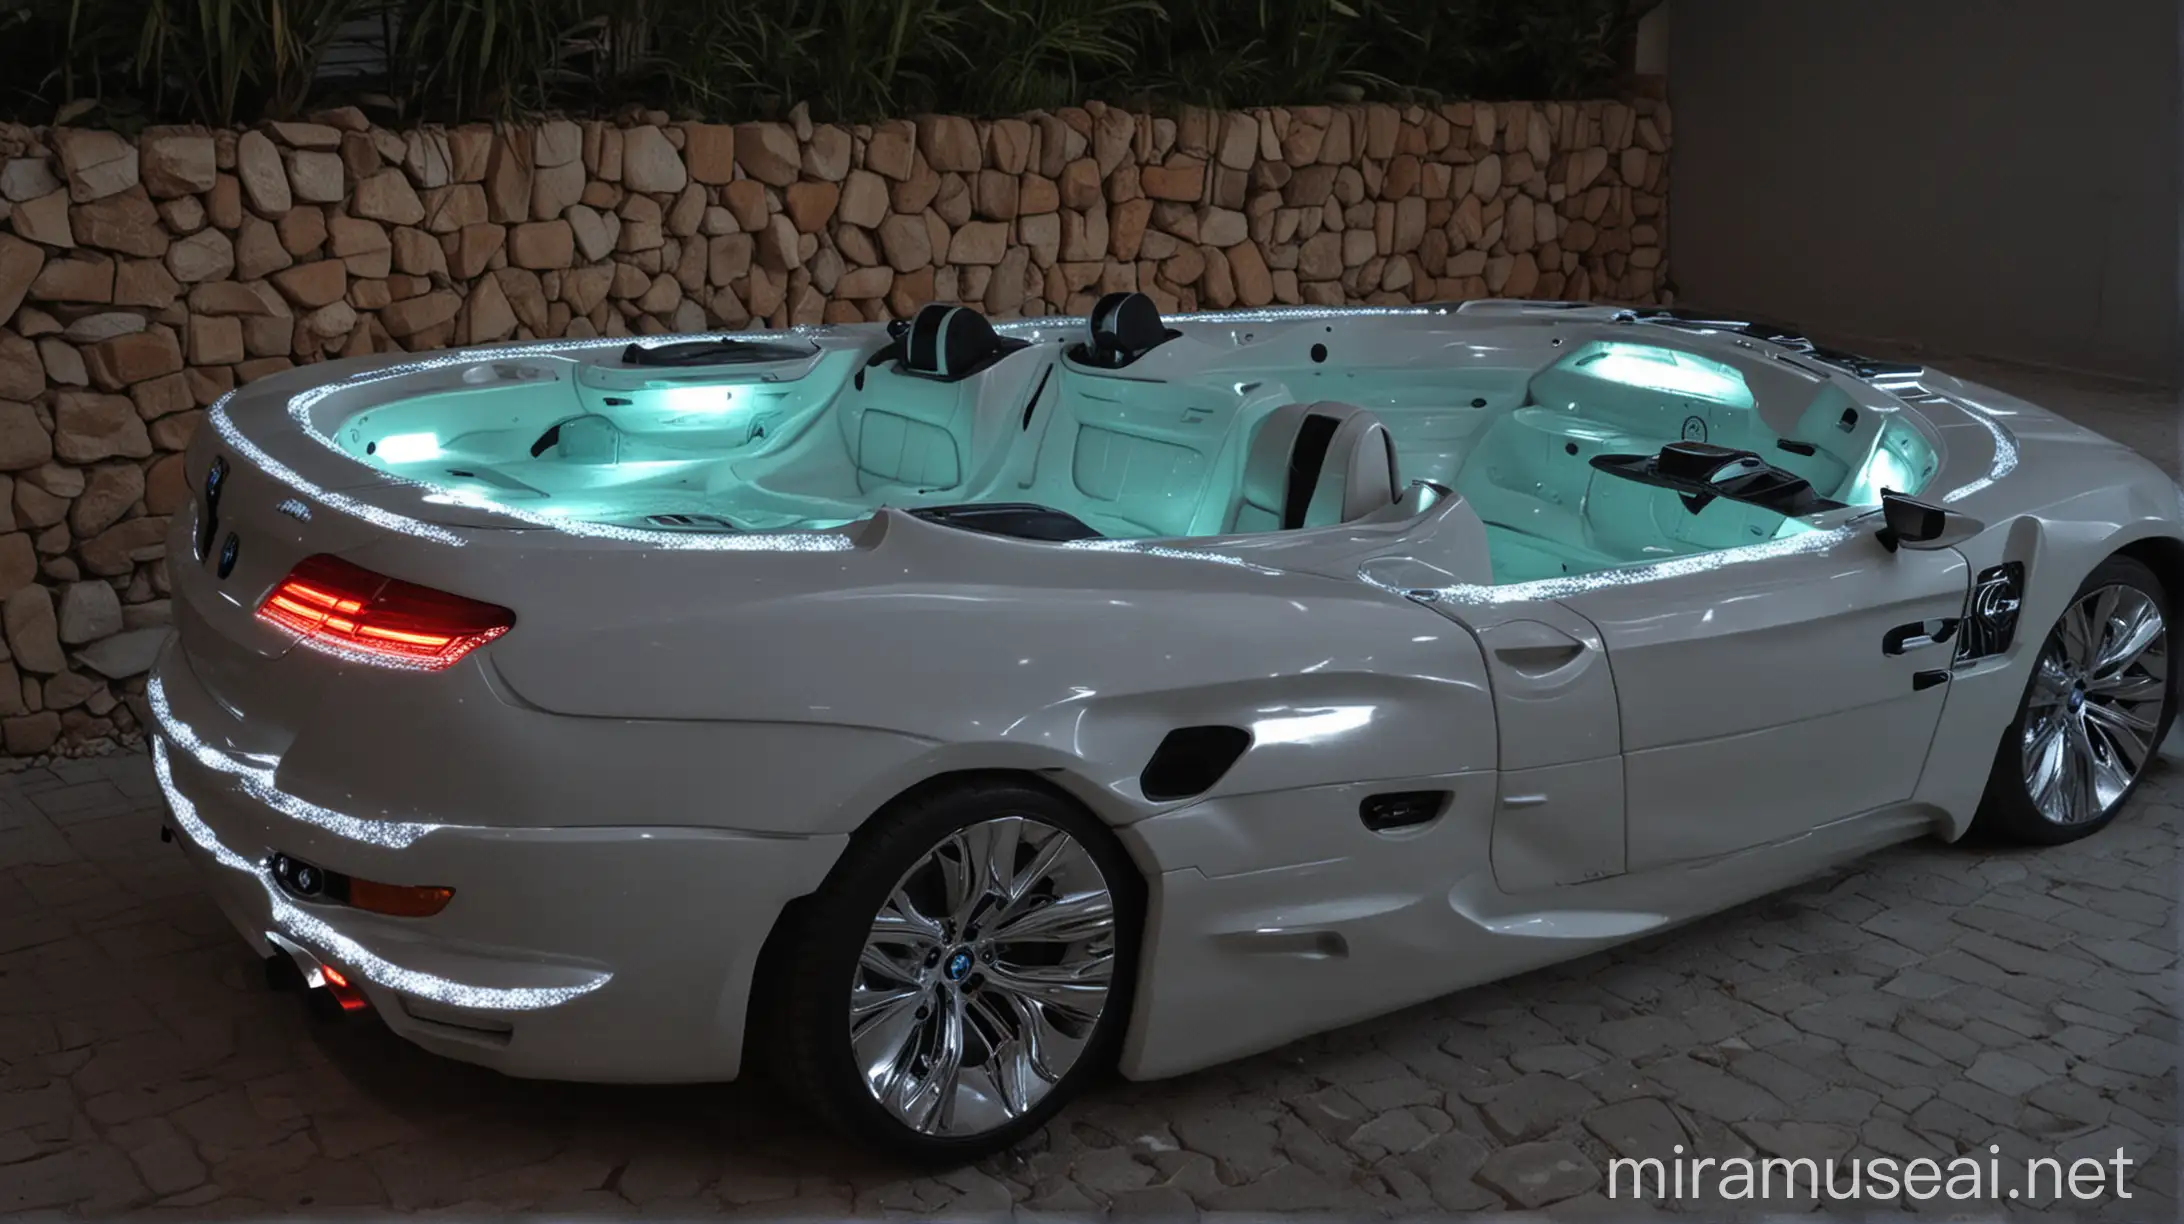 Luxury BMW CarShaped Jacuzzi with Headlights On